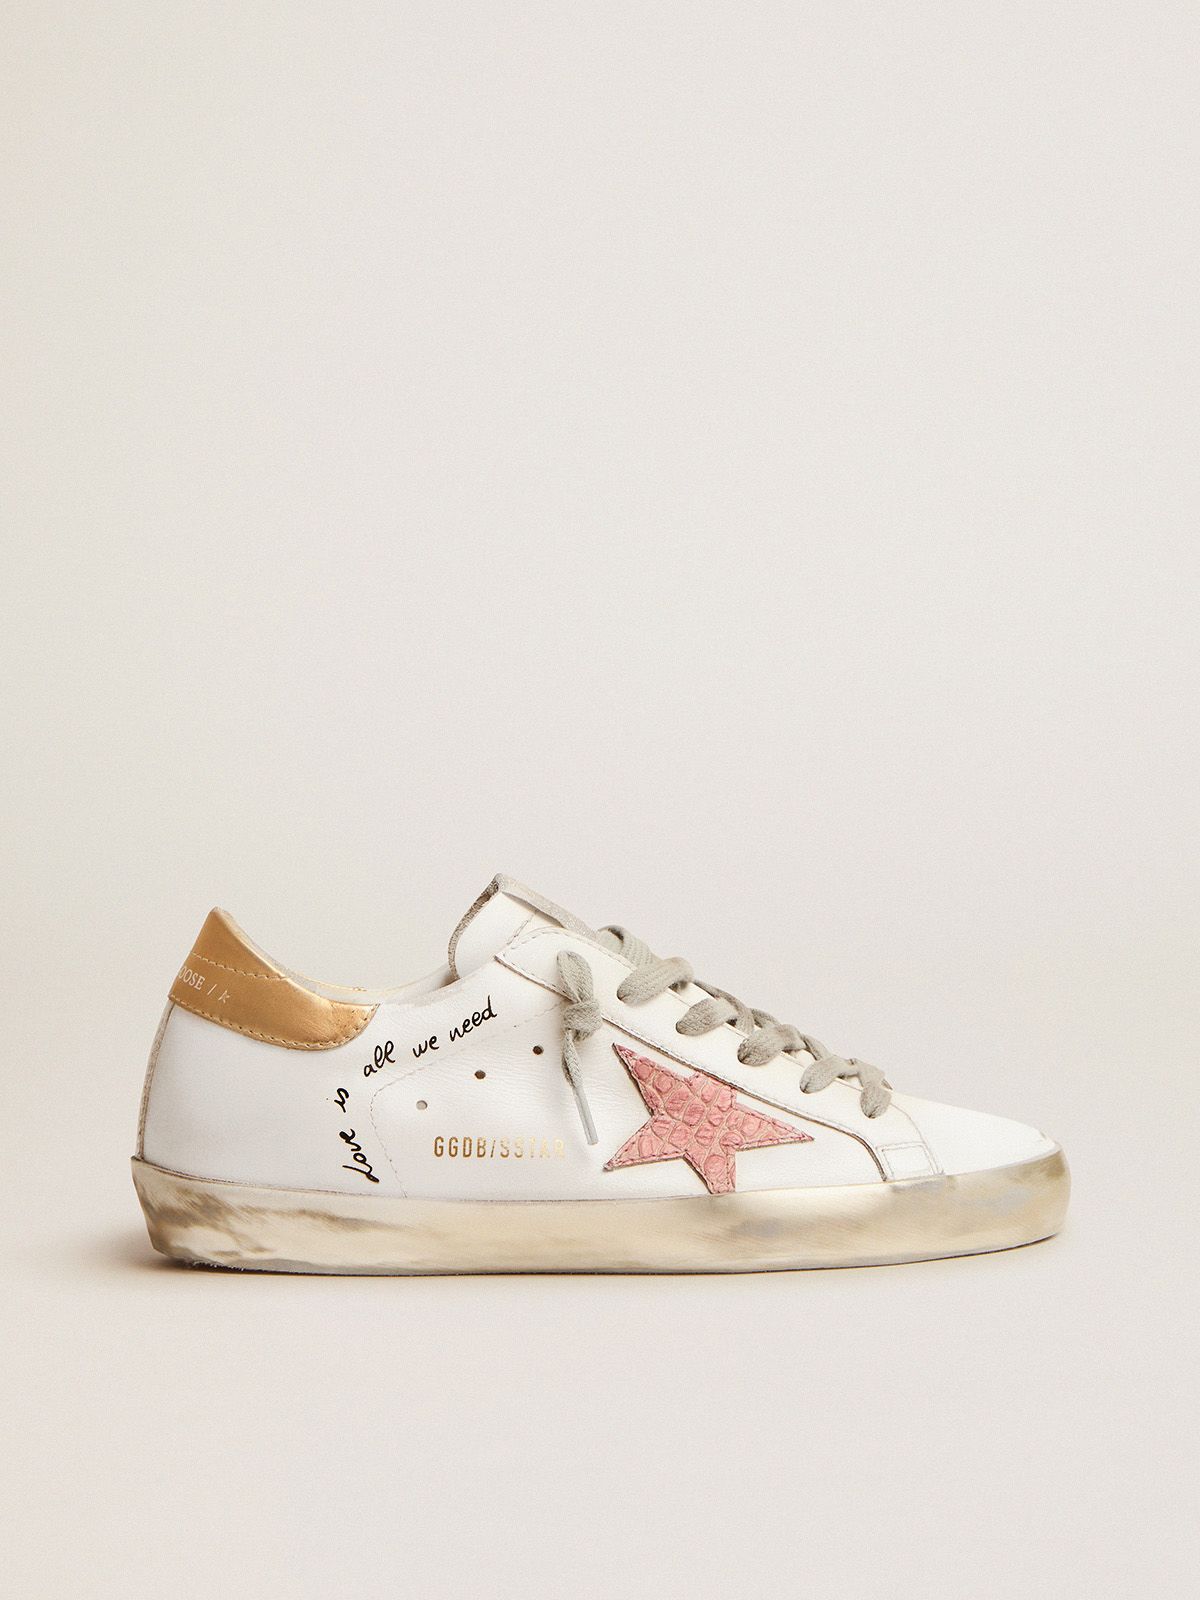 golden goose stars crocodile-print sneakers handwritten with and Super-Star leather lettering